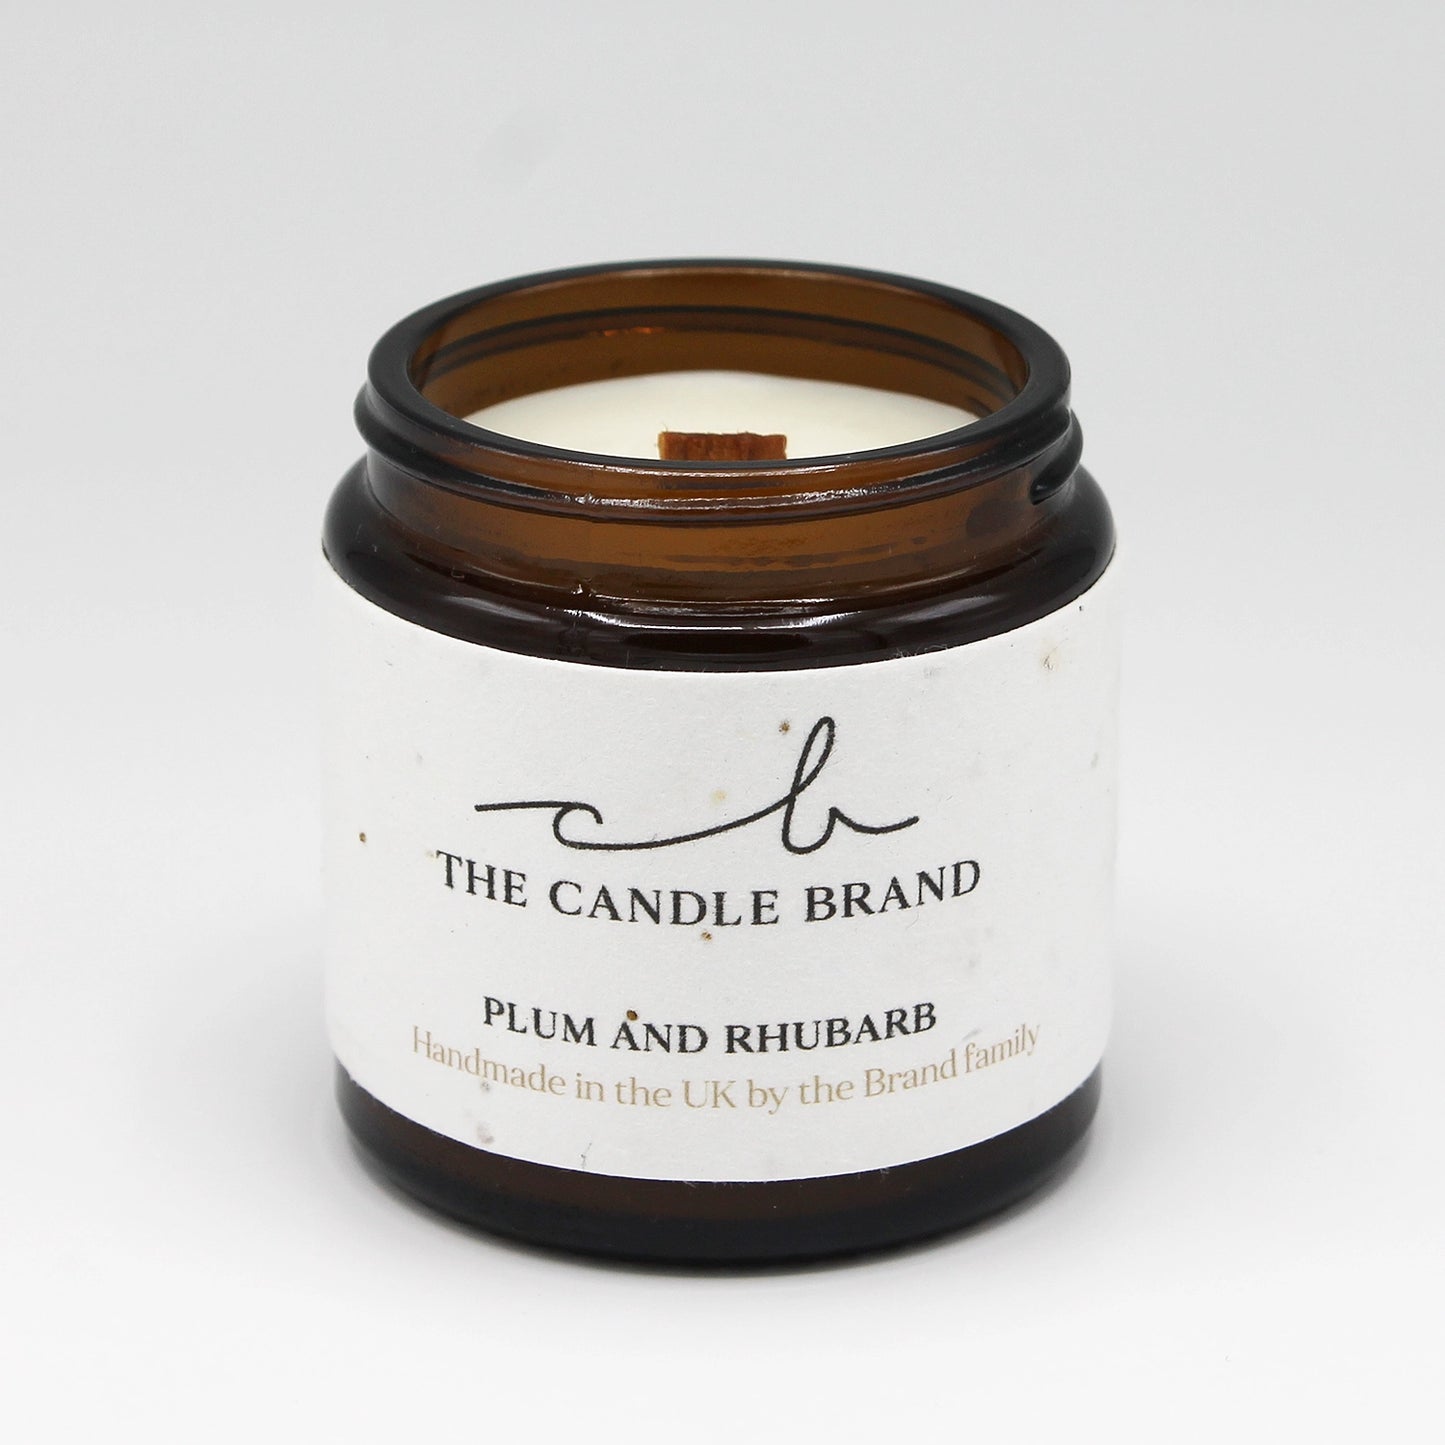 Plum and Rhubarb Burn then Bloom Candle